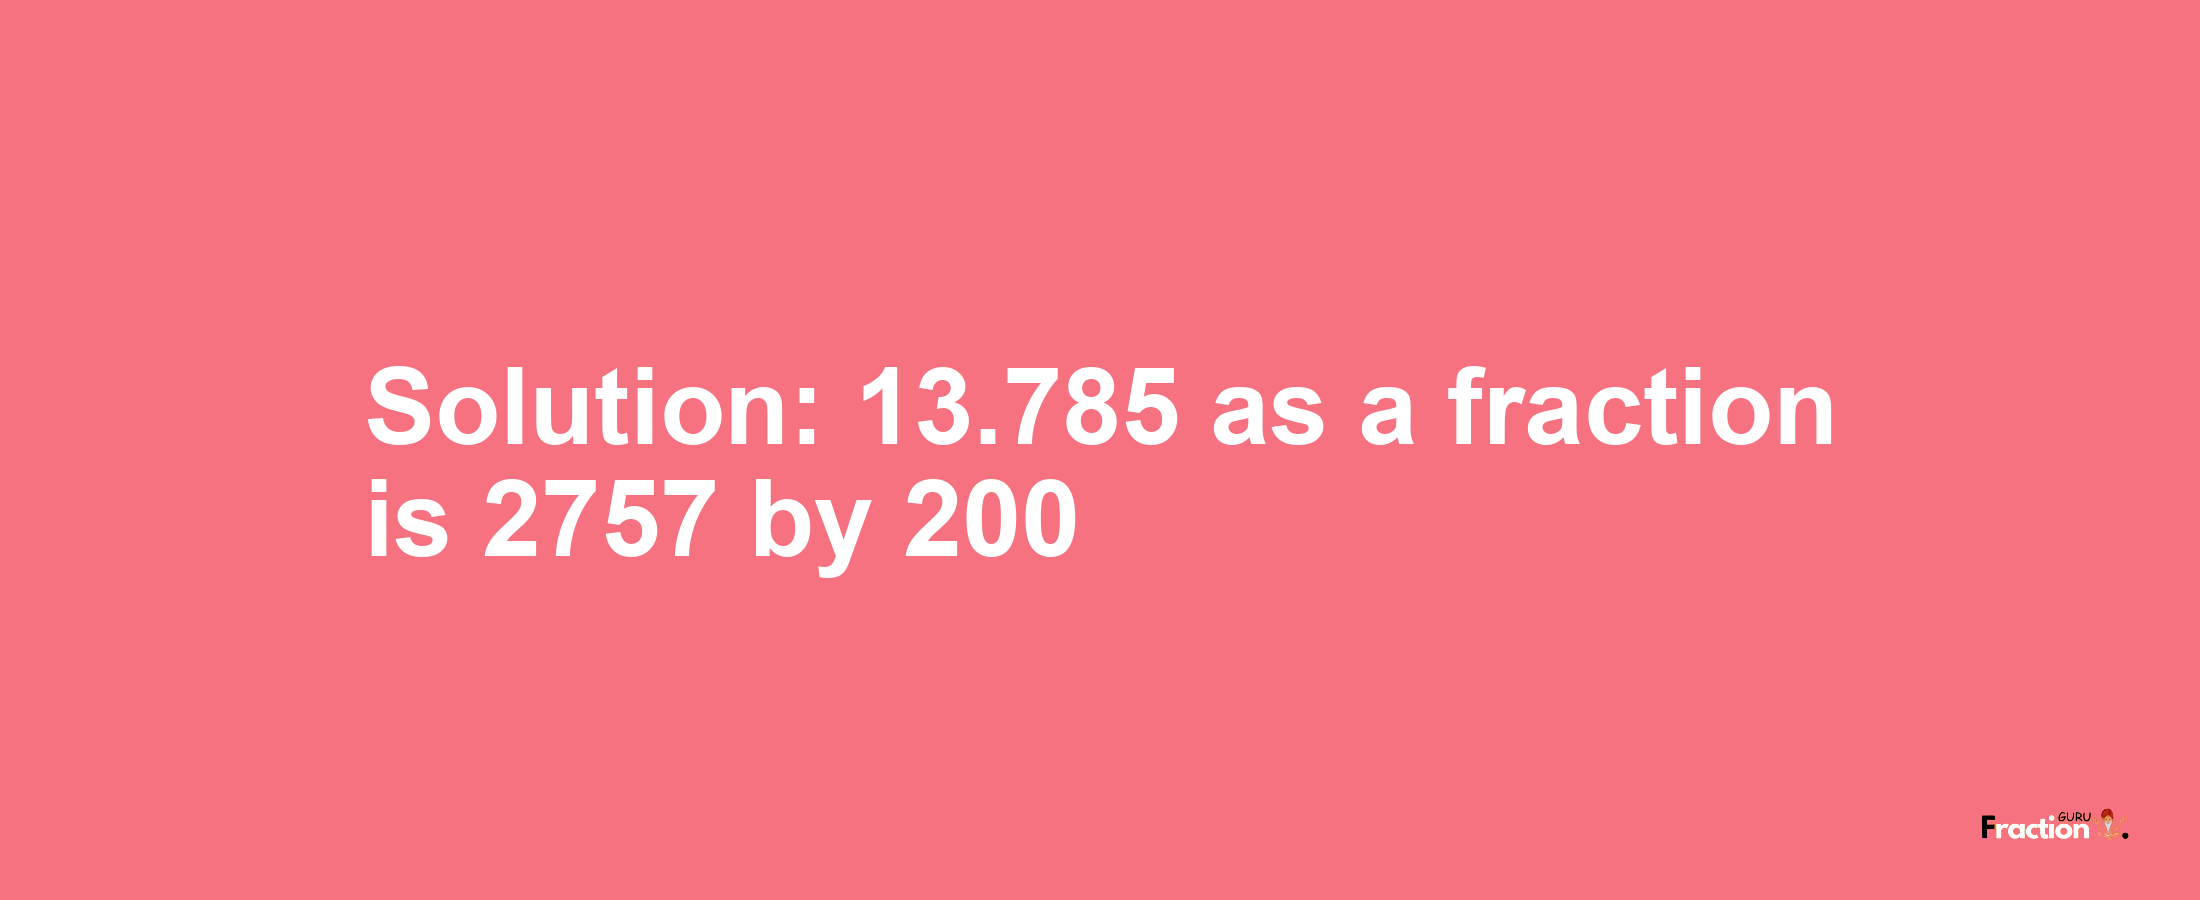 Solution:13.785 as a fraction is 2757/200